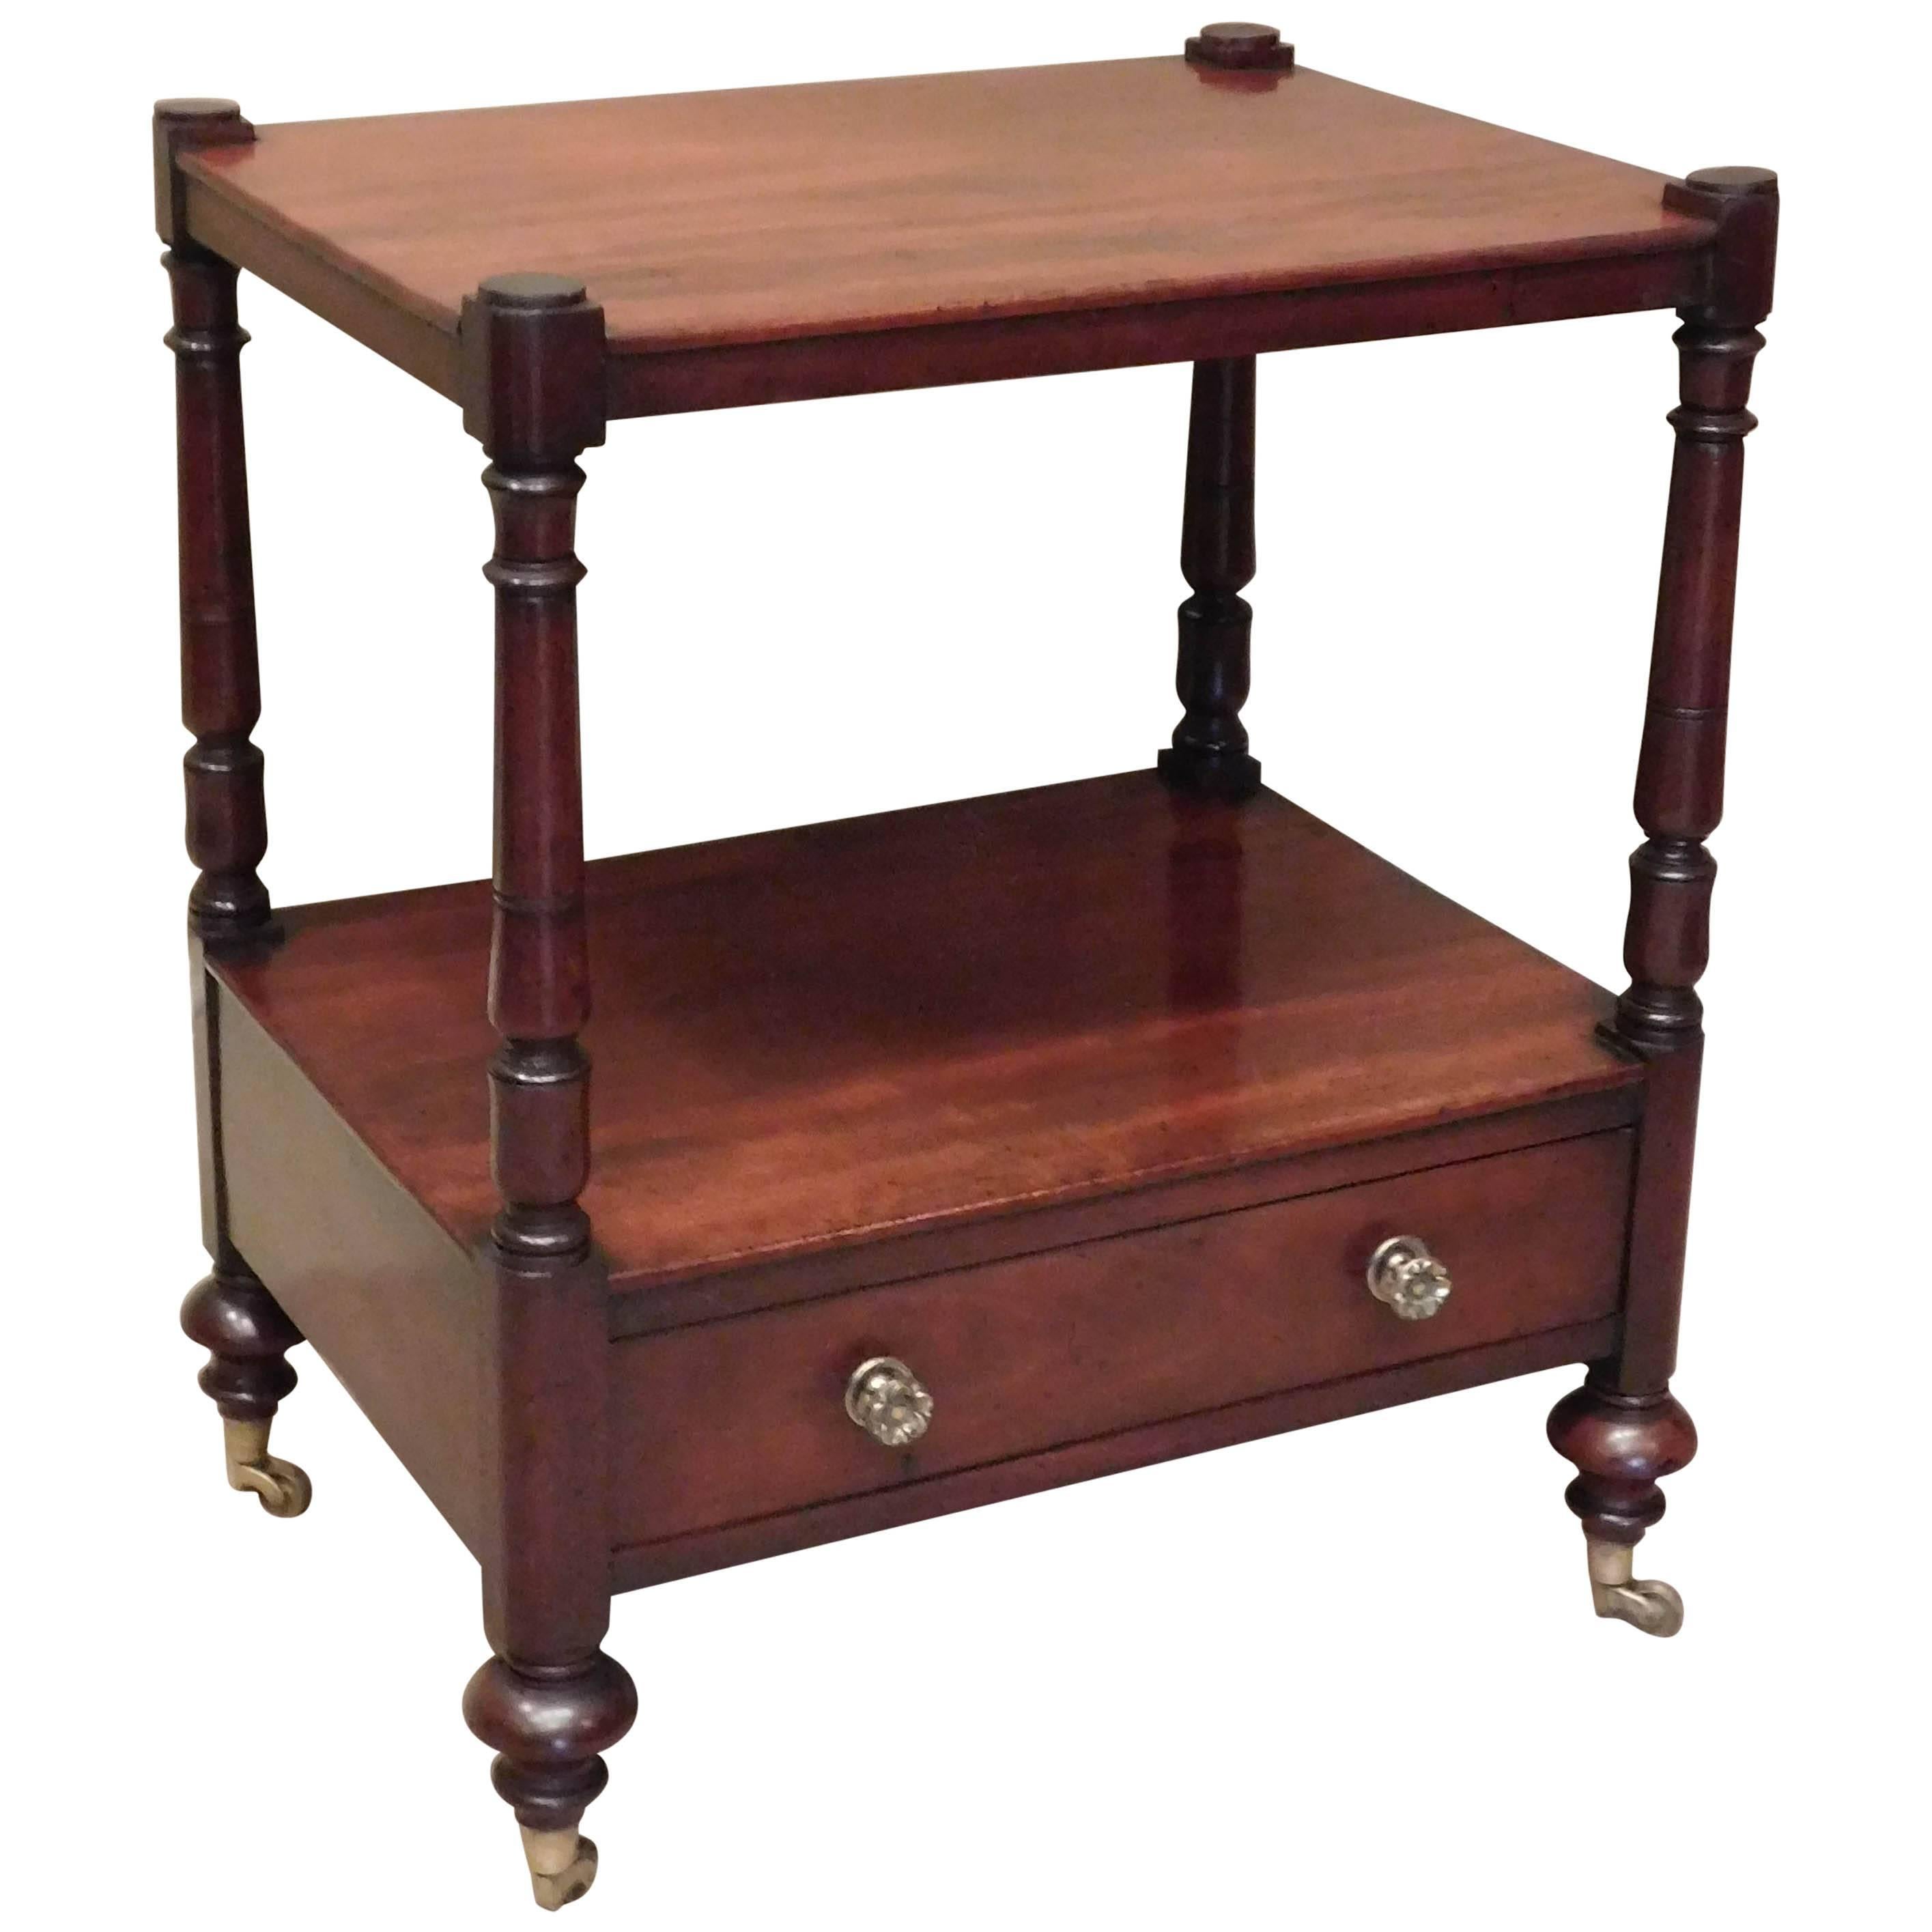 William IV Two-Tier Stand, circa 1830